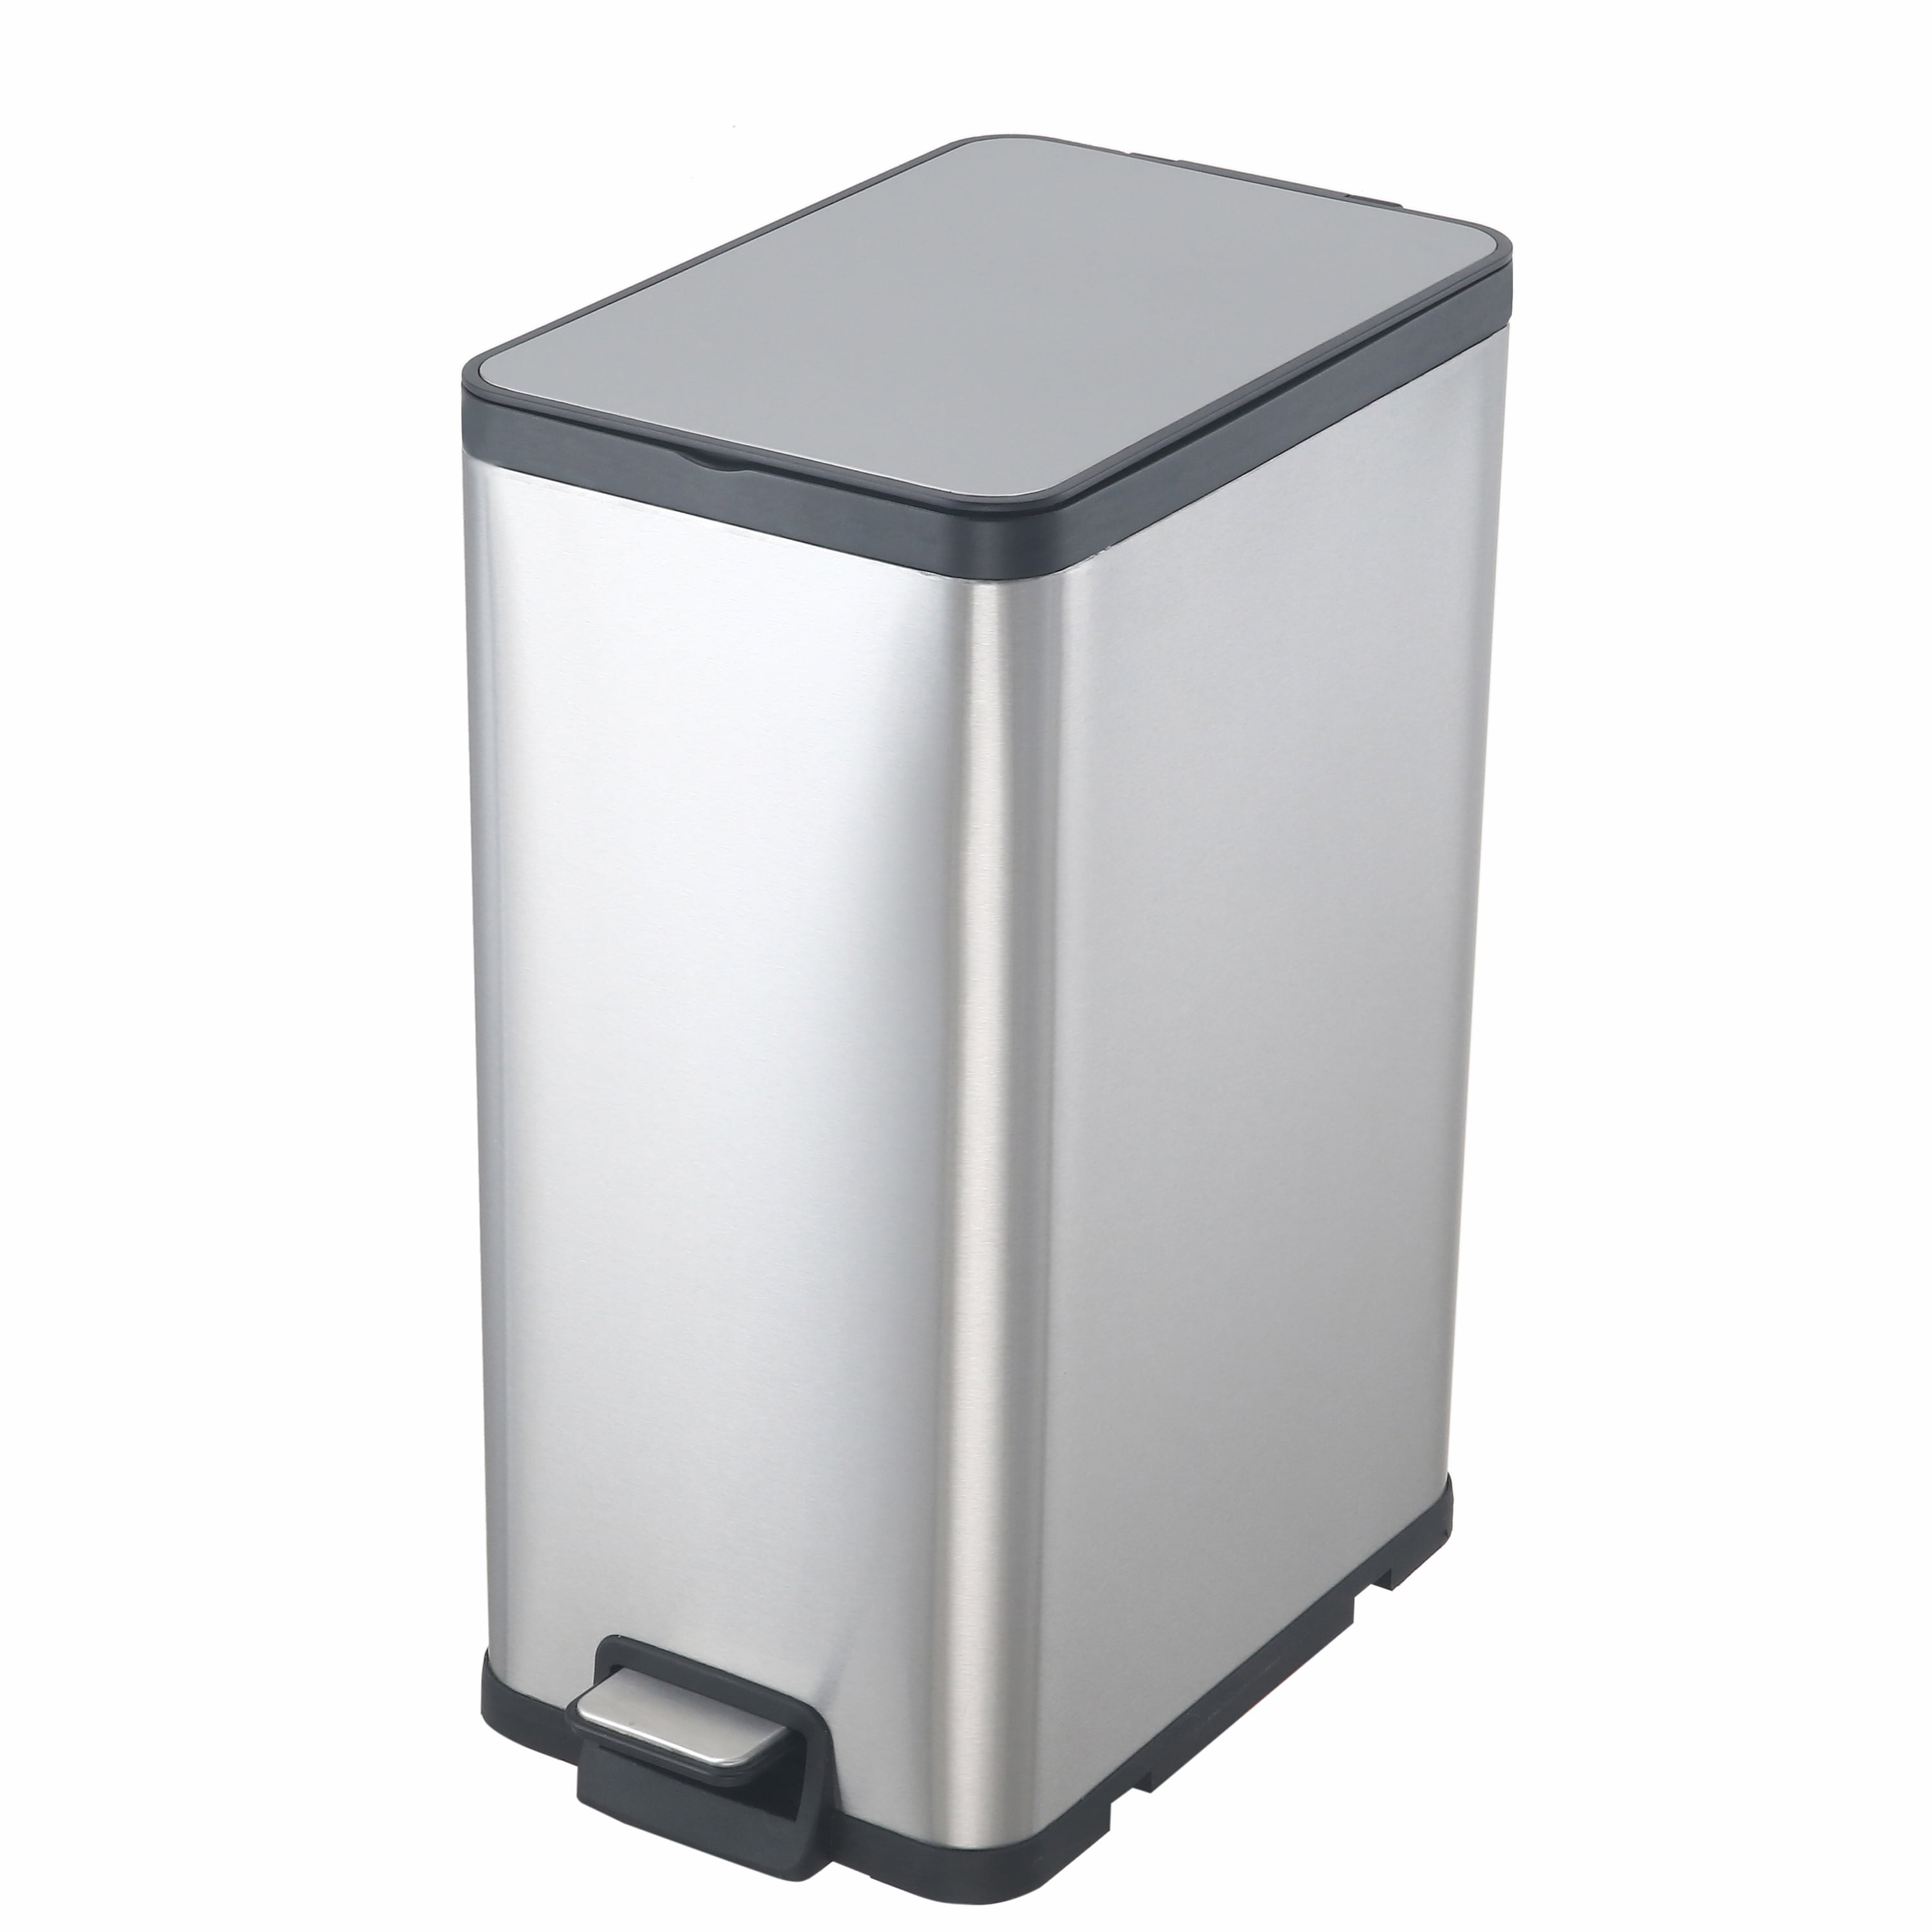 Better Homes & Gardens 7.9 gal / 30L Stainless Steel Kitchen Trash Can Stainless Steel Kitchen Trash Can Walmart